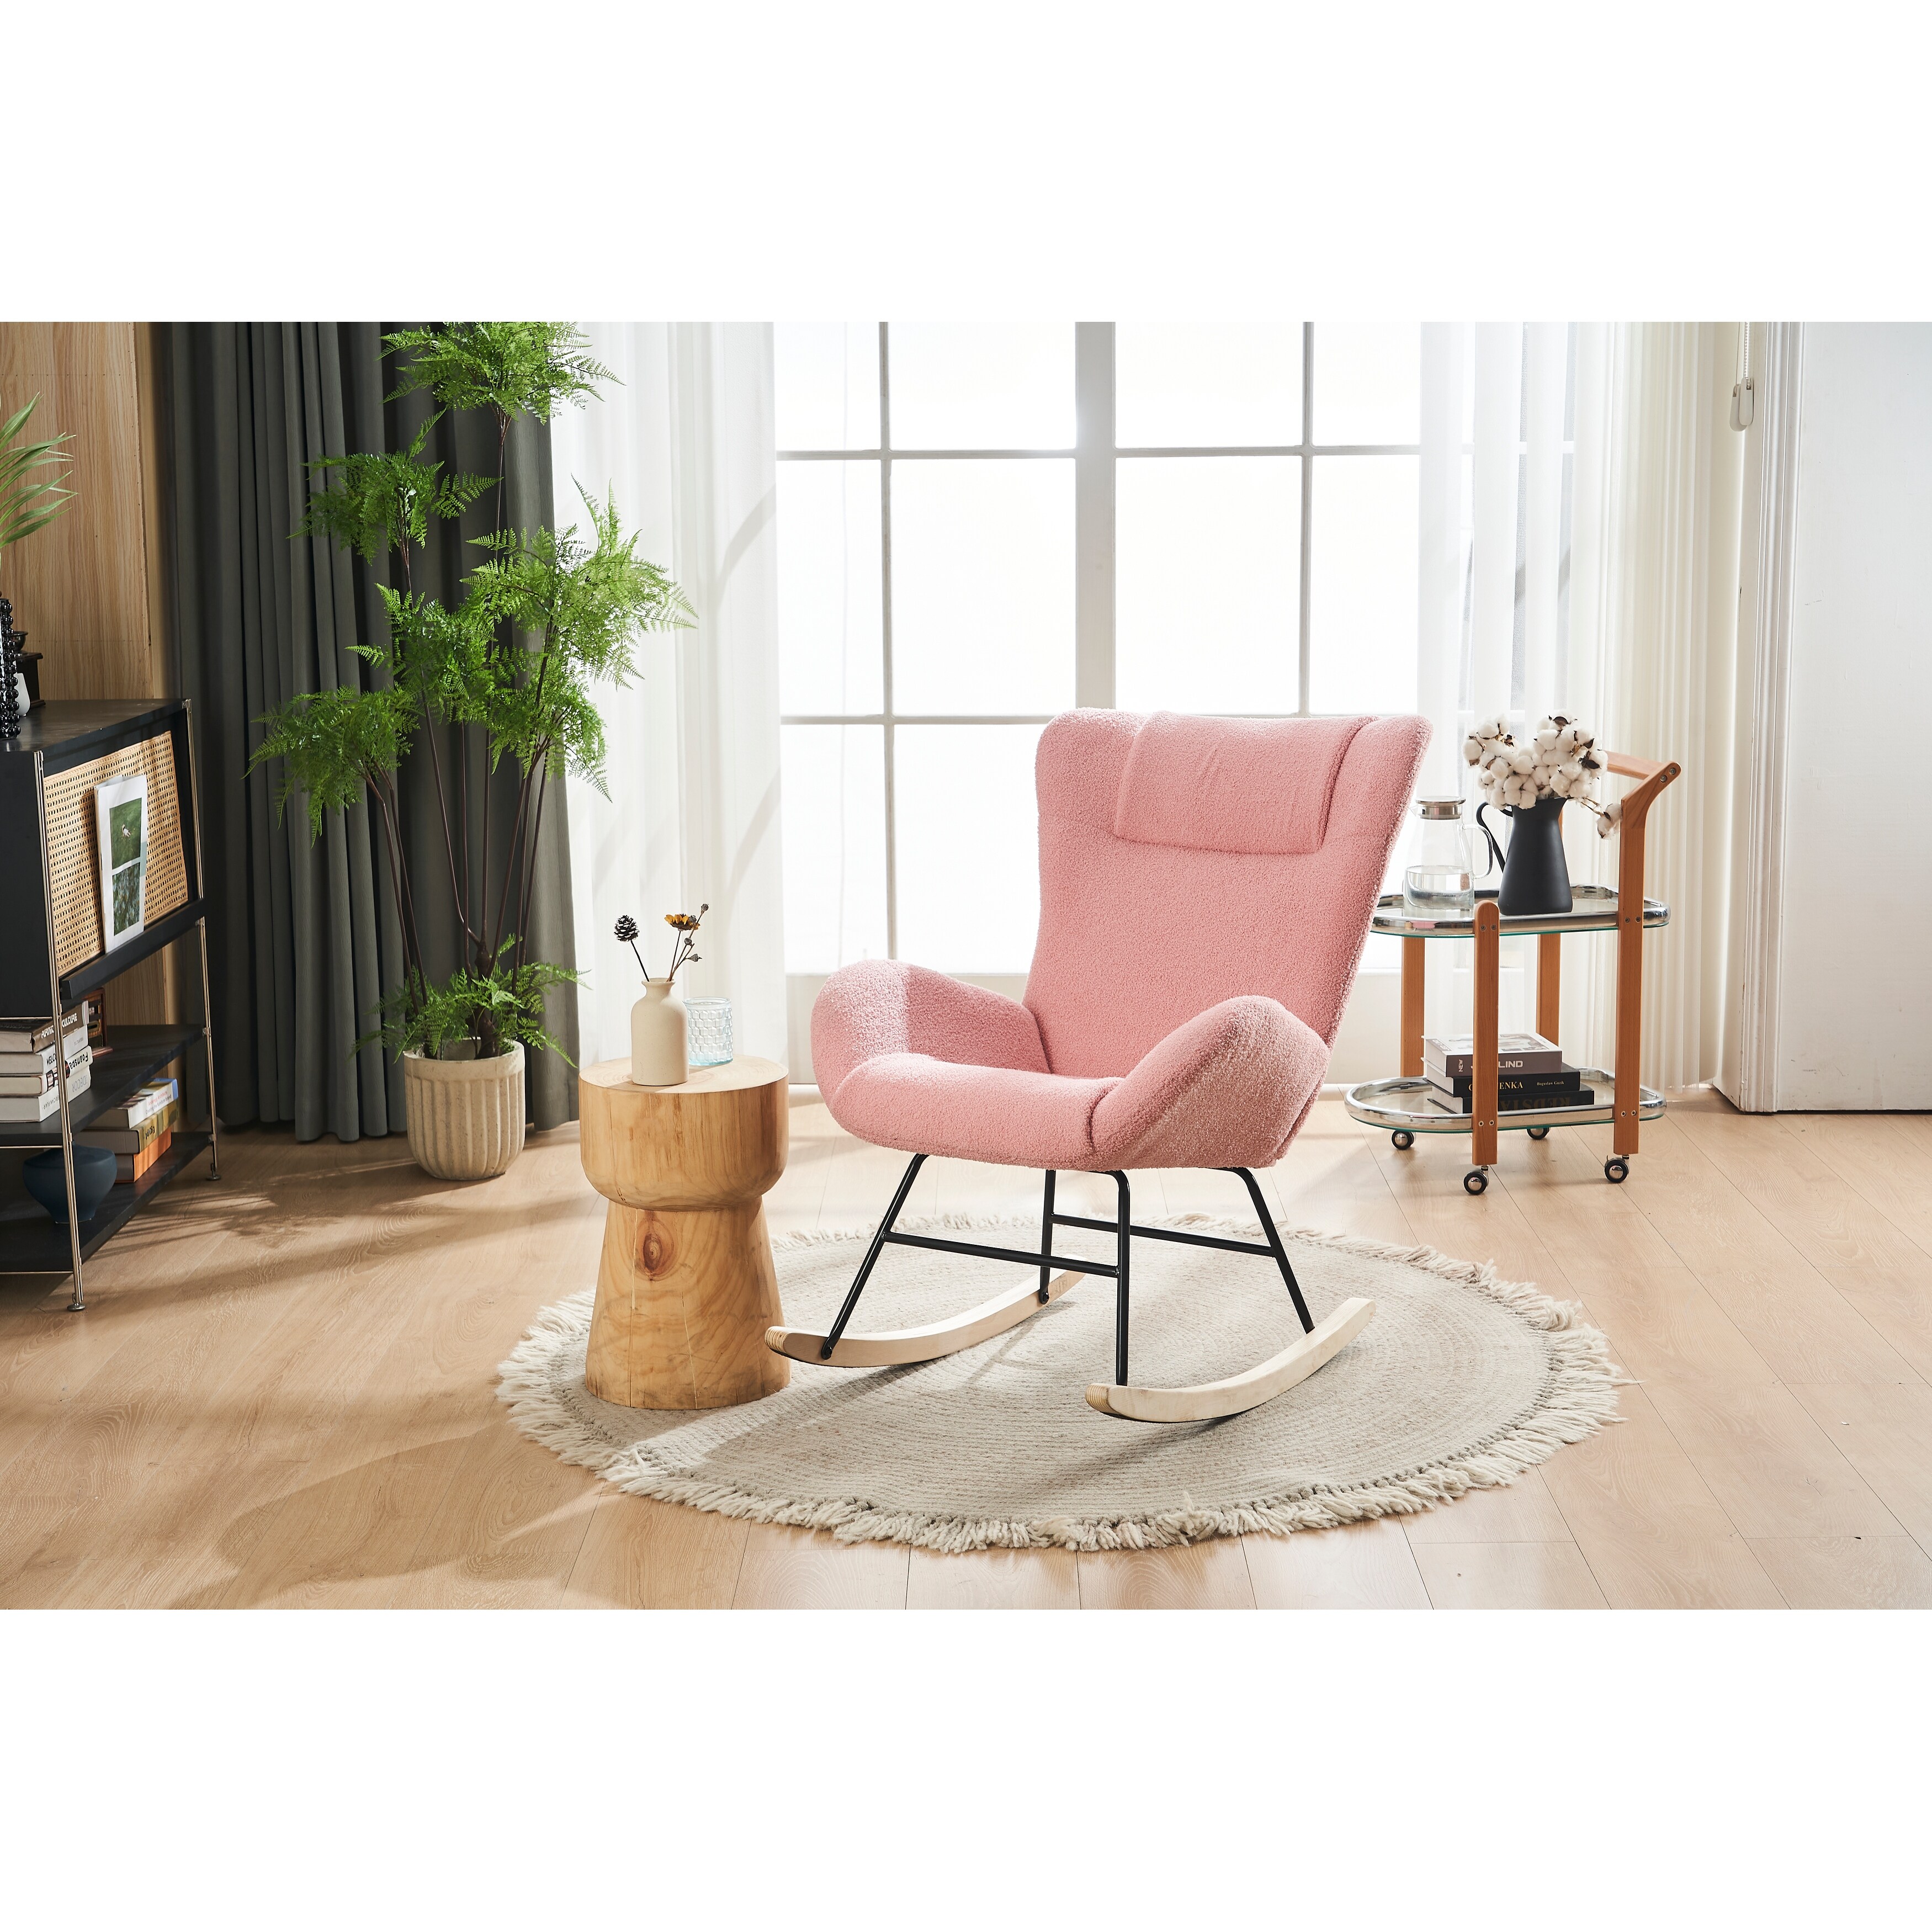 https://ak1.ostkcdn.com/images/products/is/images/direct/5f319a839ad869e67e47d6fbd30ea05c82020bf2/Rocking-Chair-Nursery%2CSolid-Wood-Legs-with-Teddy-Fabric-Upholstered%2CNap-Armchair-for-Living-Rooms%2CBedrooms%2CBest-Gift.jpg